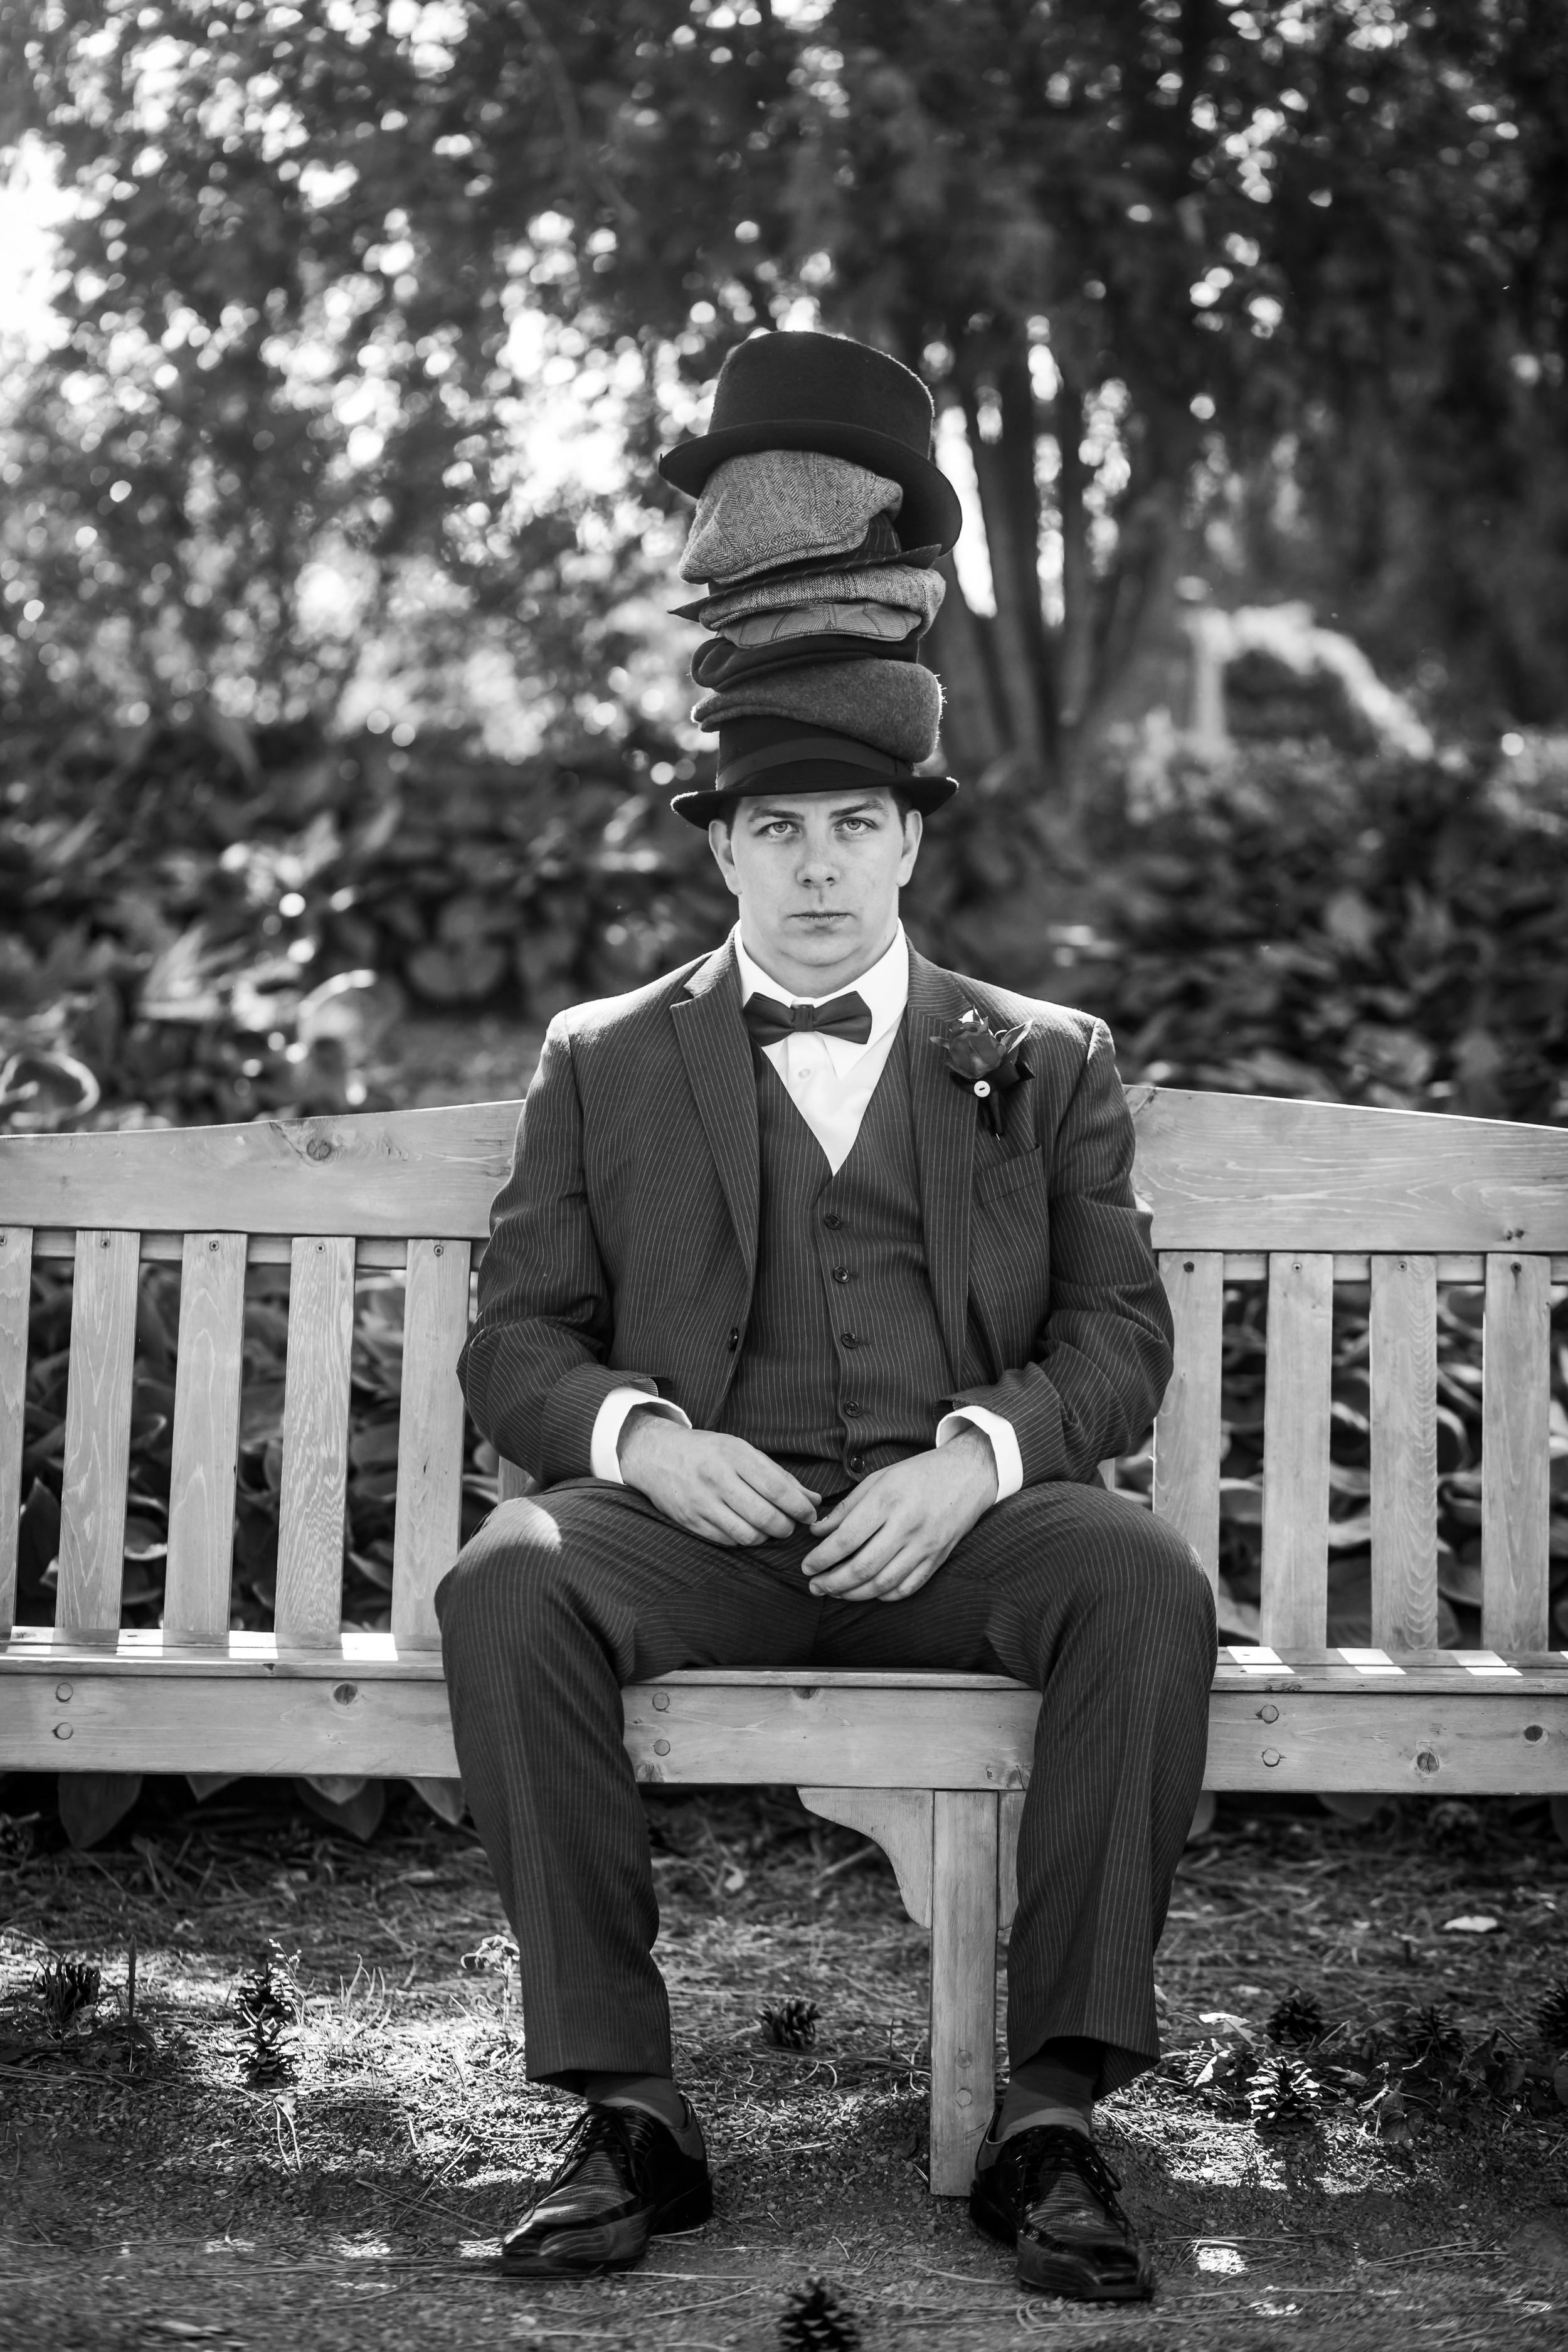 A portrait of the groom seated on a bench wearing a bunch of hats